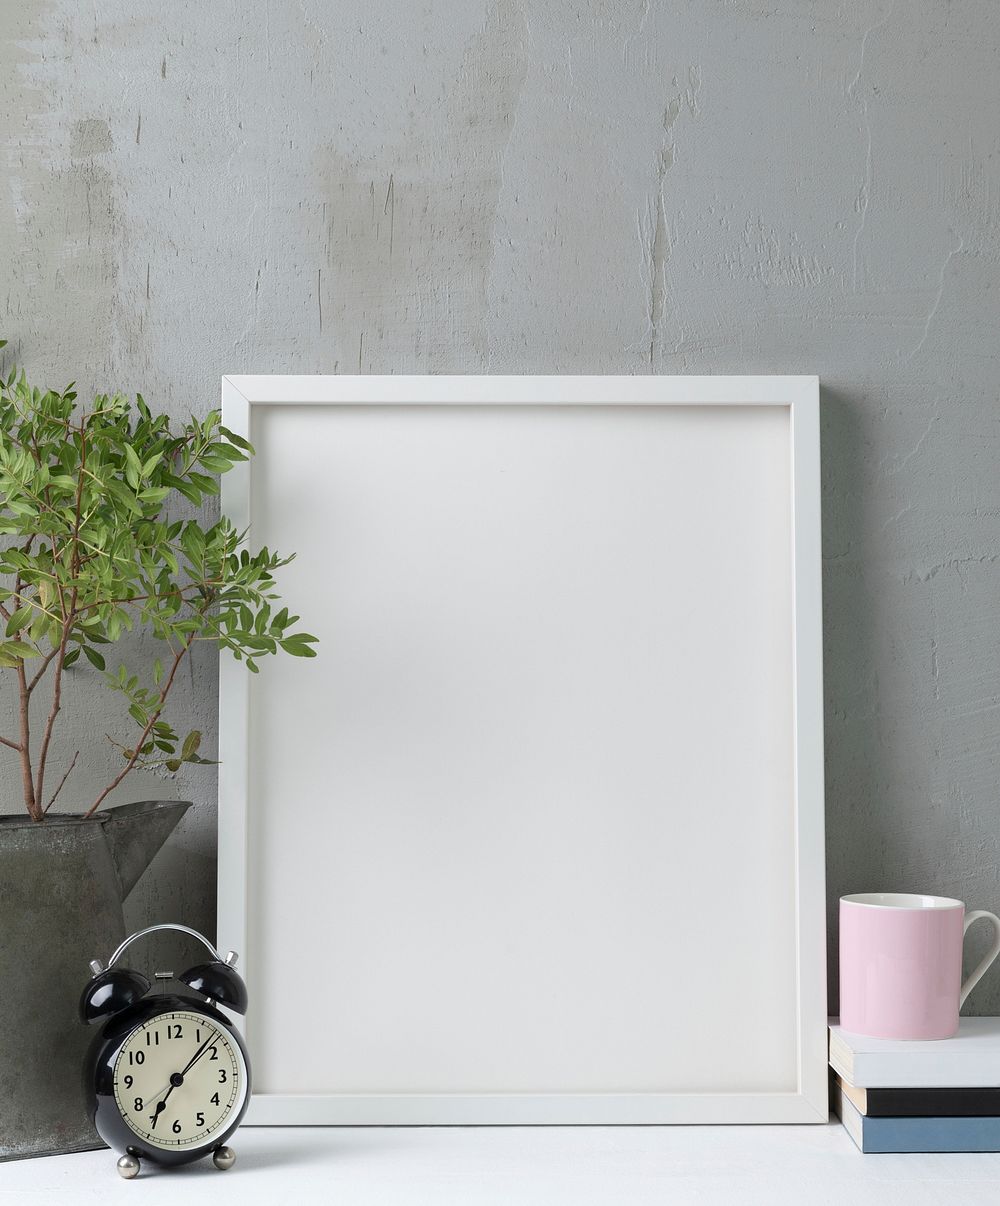 White frame, blank space, simple home decor